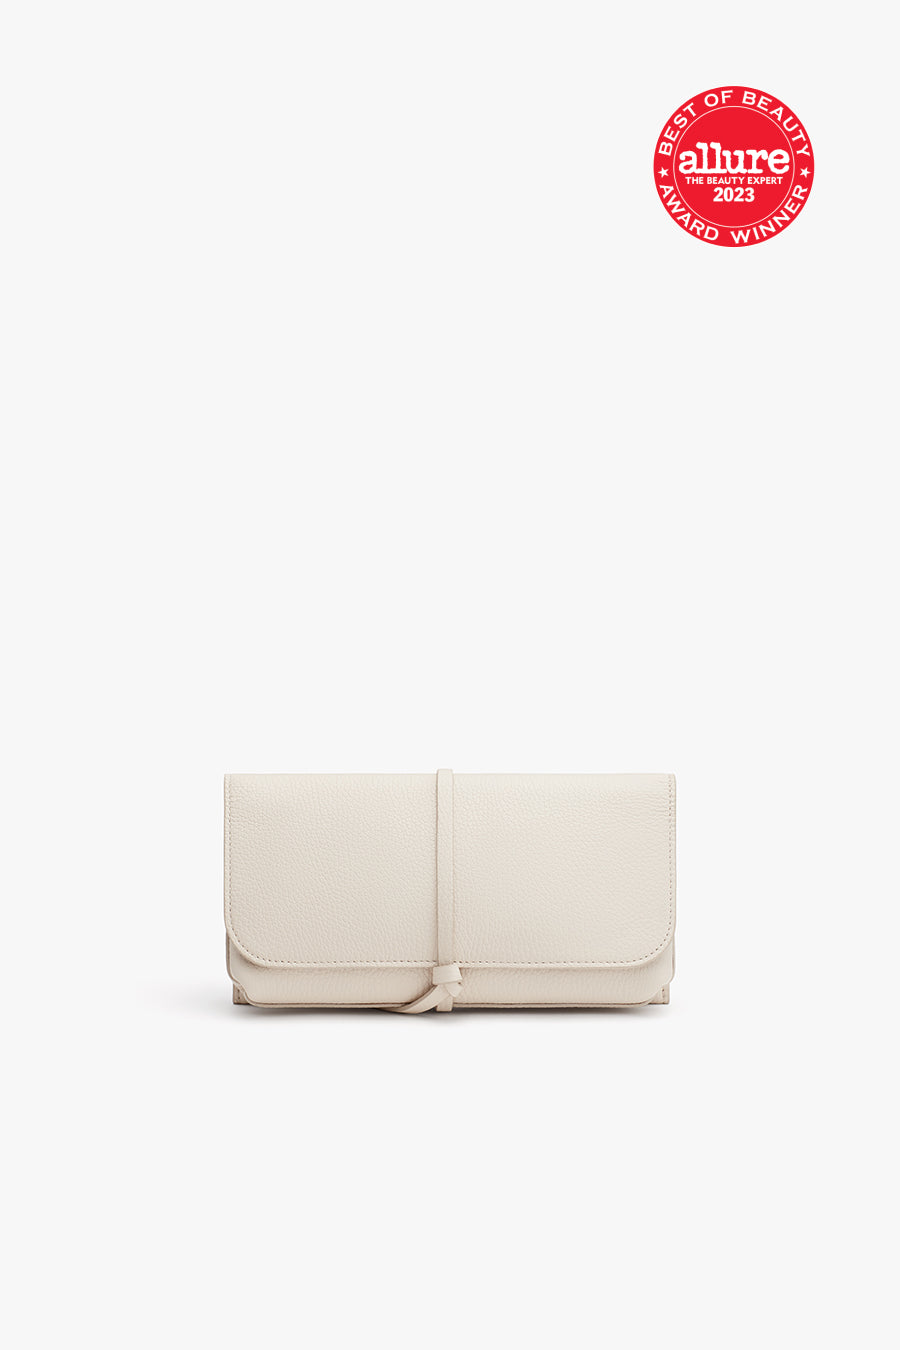 Cuyana Is My Go-to For Leather Handbags - Lace & Pearls